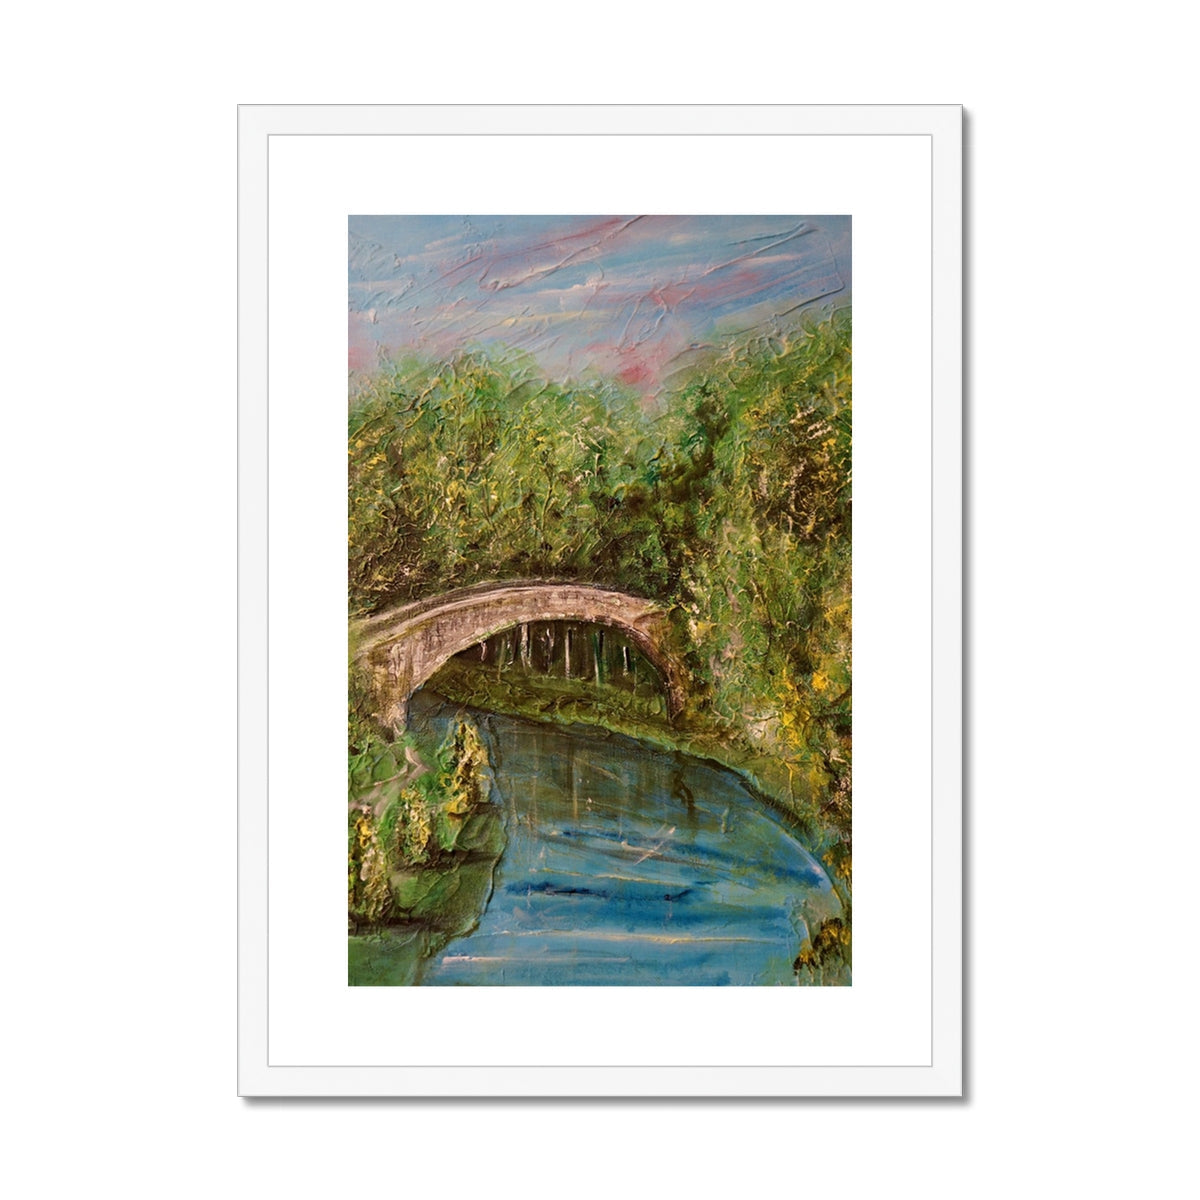 The Brig O Doon Painting | Framed & Mounted Prints From Scotland-Framed & Mounted Prints-Historic & Iconic Scotland Art Gallery-A2 Portrait-White Frame-Paintings, Prints, Homeware, Art Gifts From Scotland By Scottish Artist Kevin Hunter